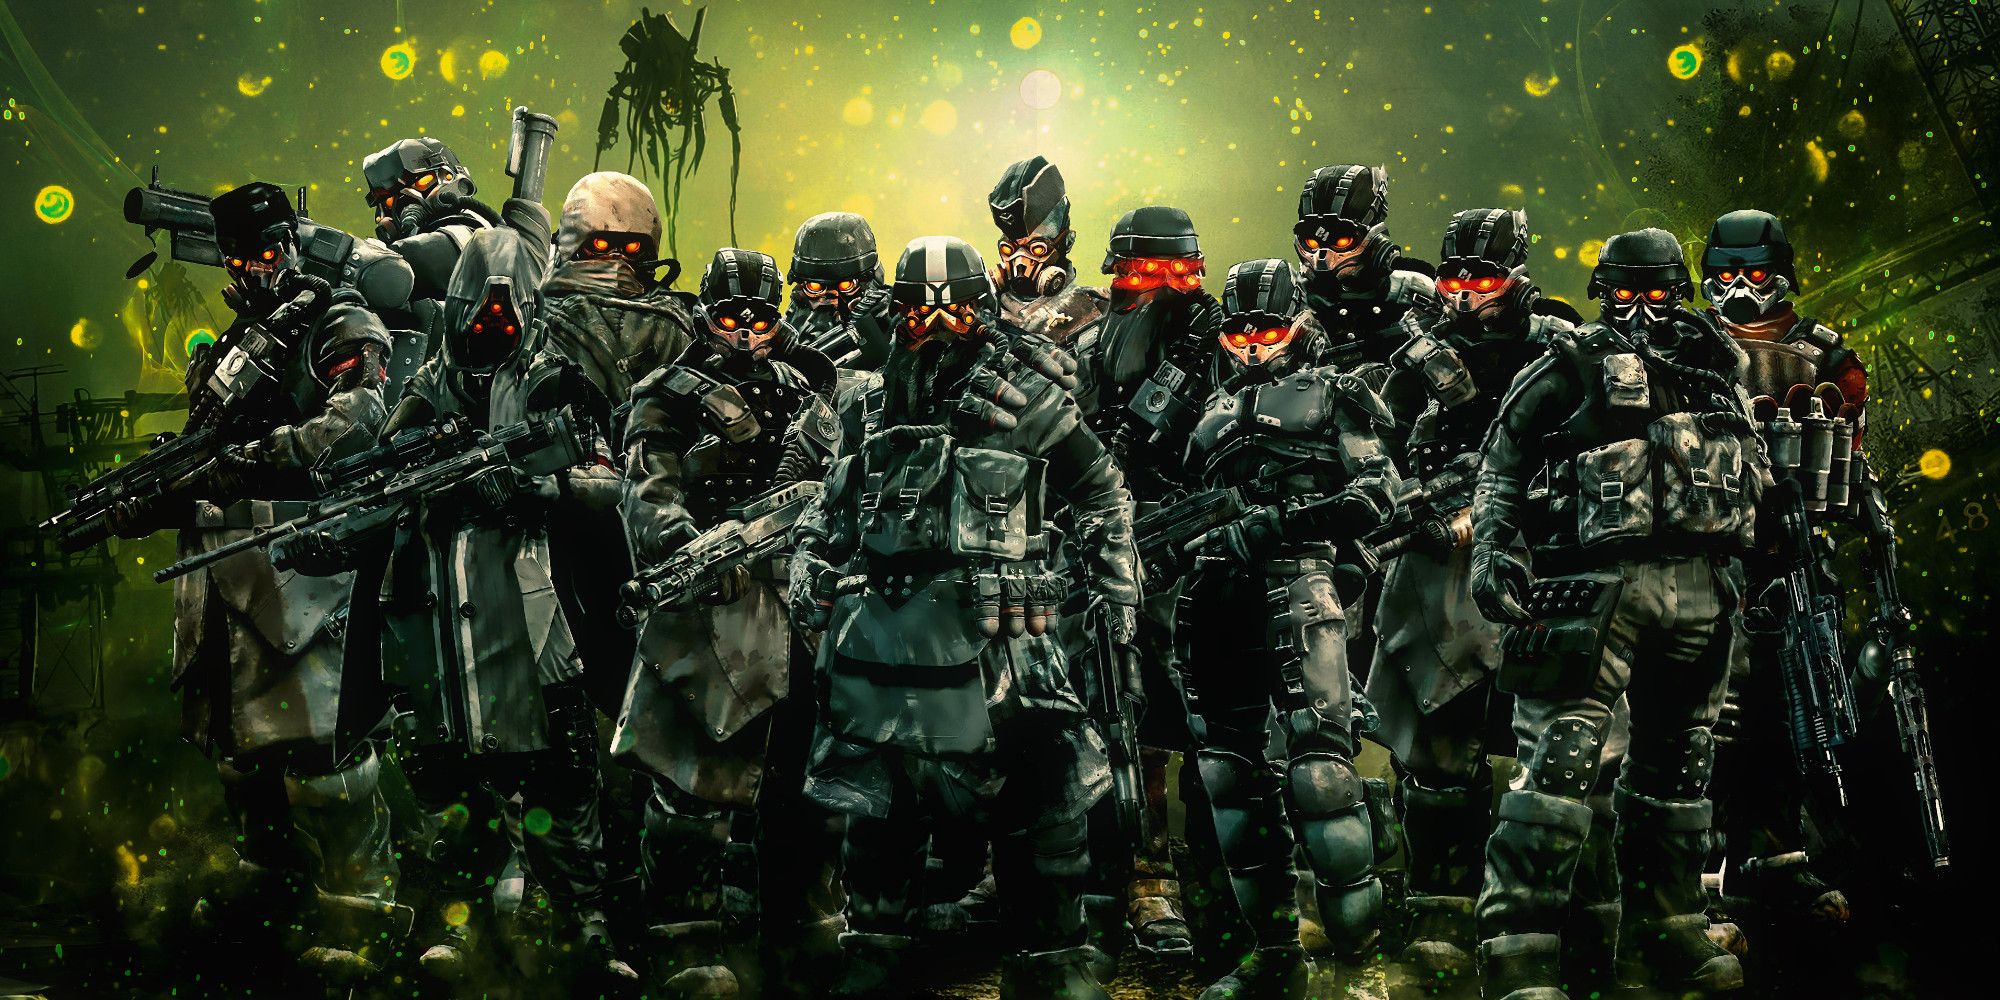 a lineup of all the types of Helghast soldiers from Killzone